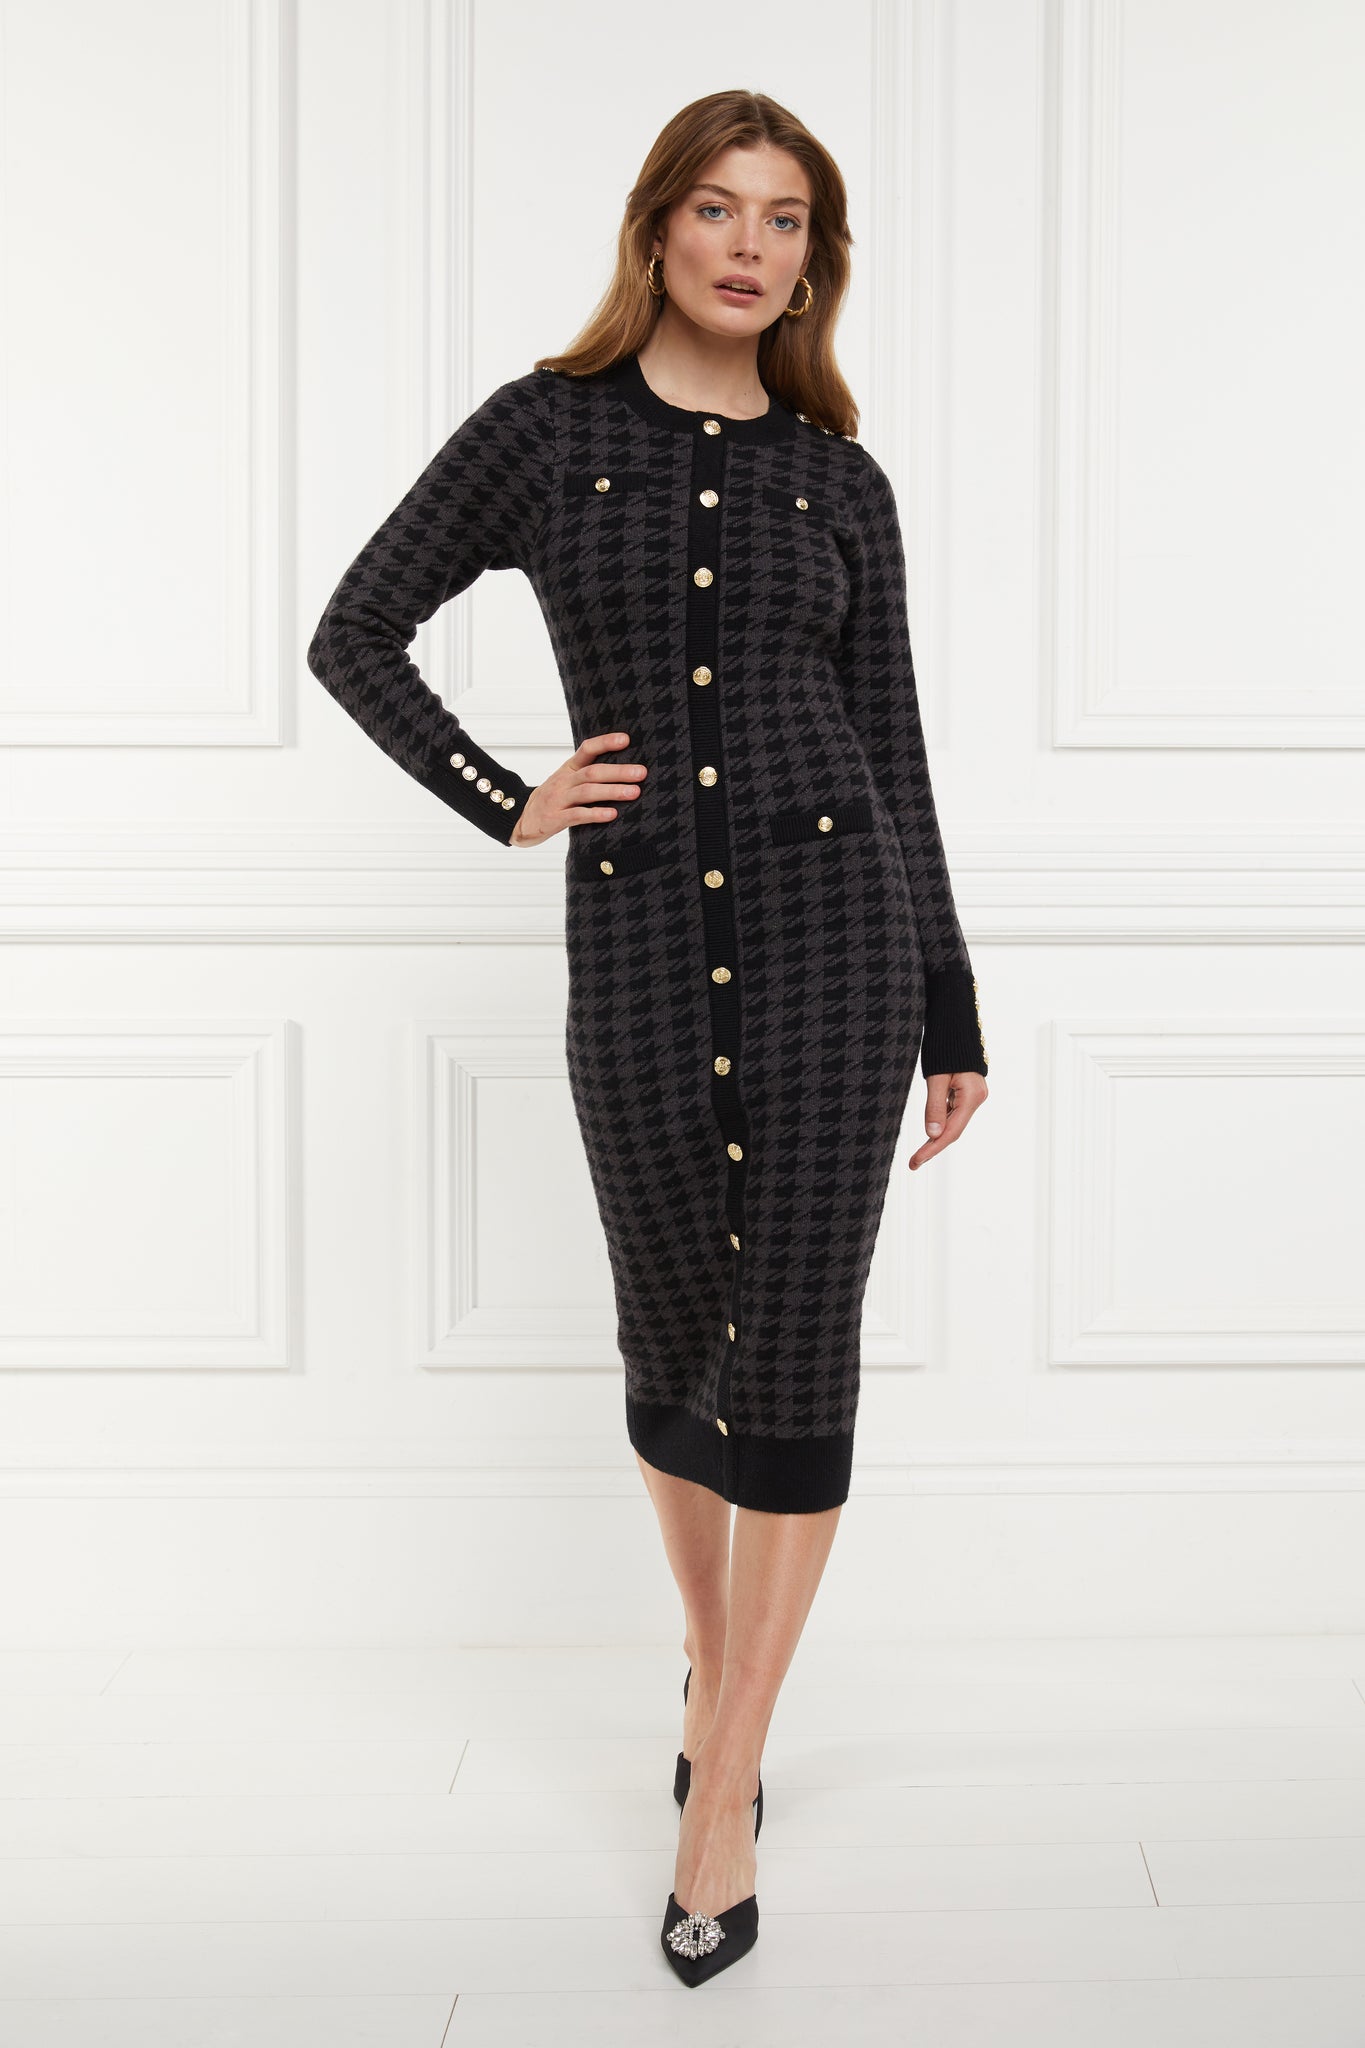 womens slim fit crew neck long sleeve knitted midi dress in grey and black houndstooth with gold button detail on contrast black panel down the centre front and two black contrast welt pockets on chest and two on the hips with gold buttons on the centre of each and contrasting black ribbed hem neckline and cuffs